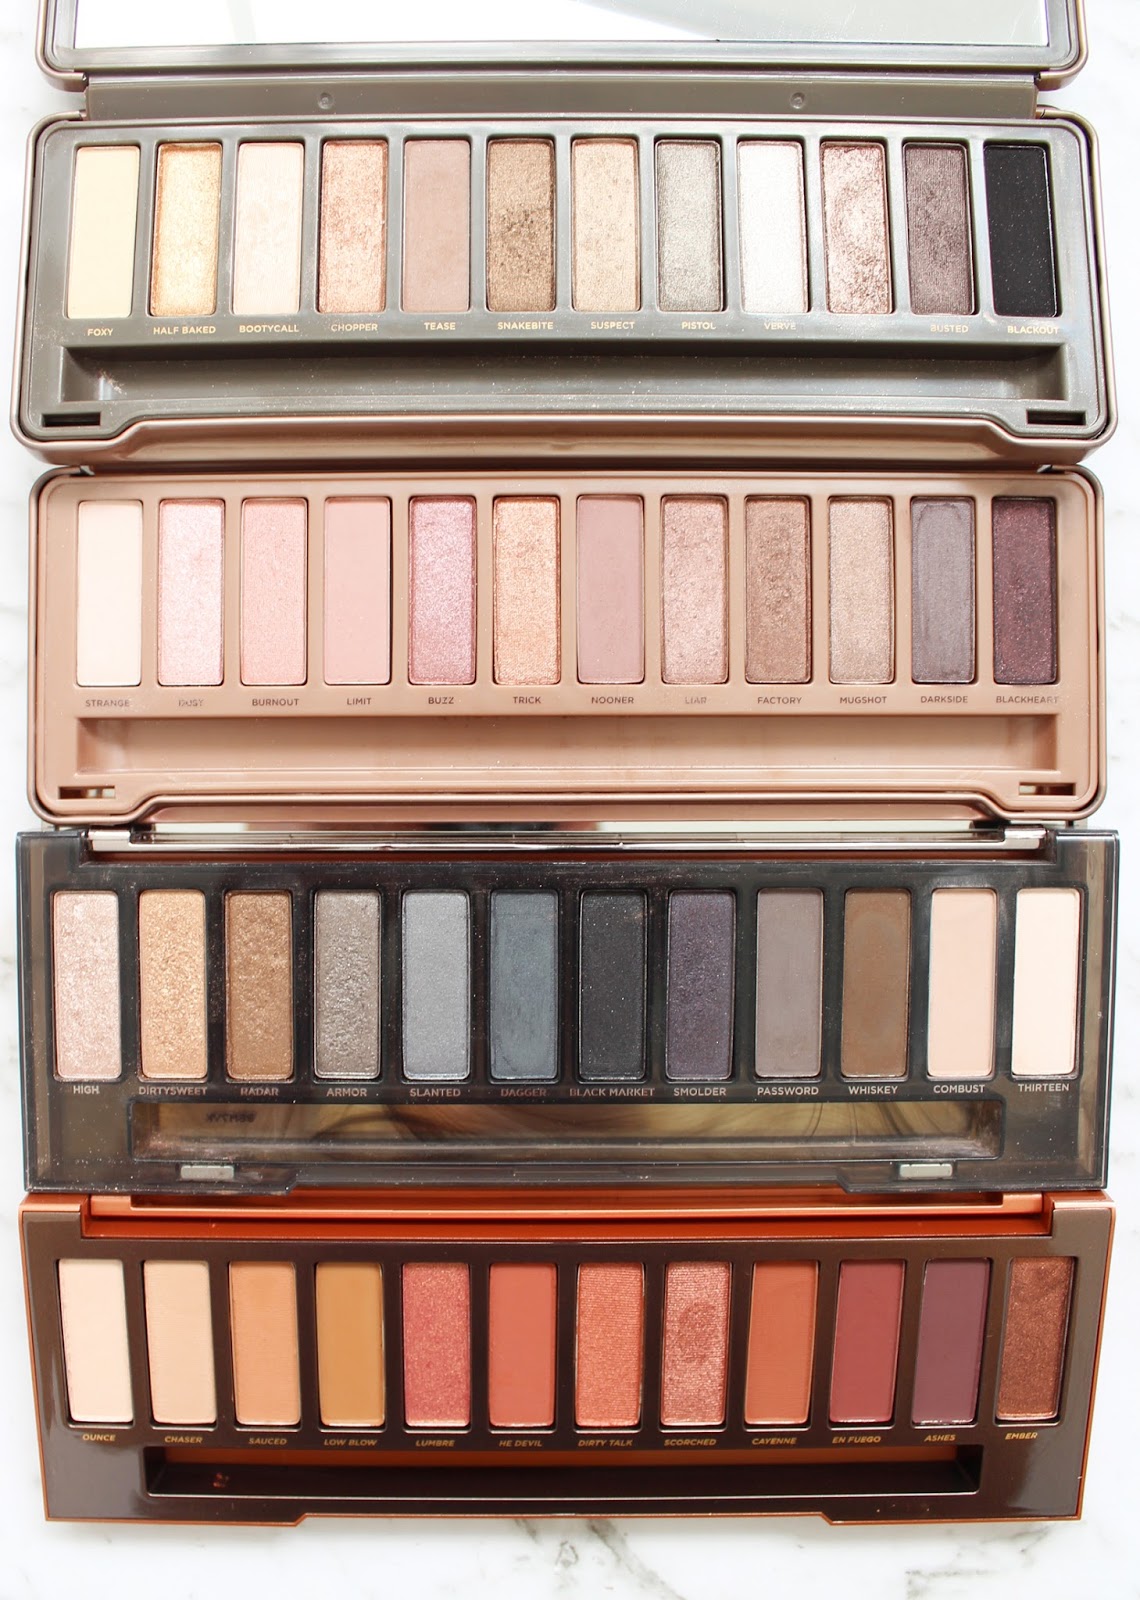 URBAN DECAY | Naked Heat Palette - Review + Swatches - CassandraMyee